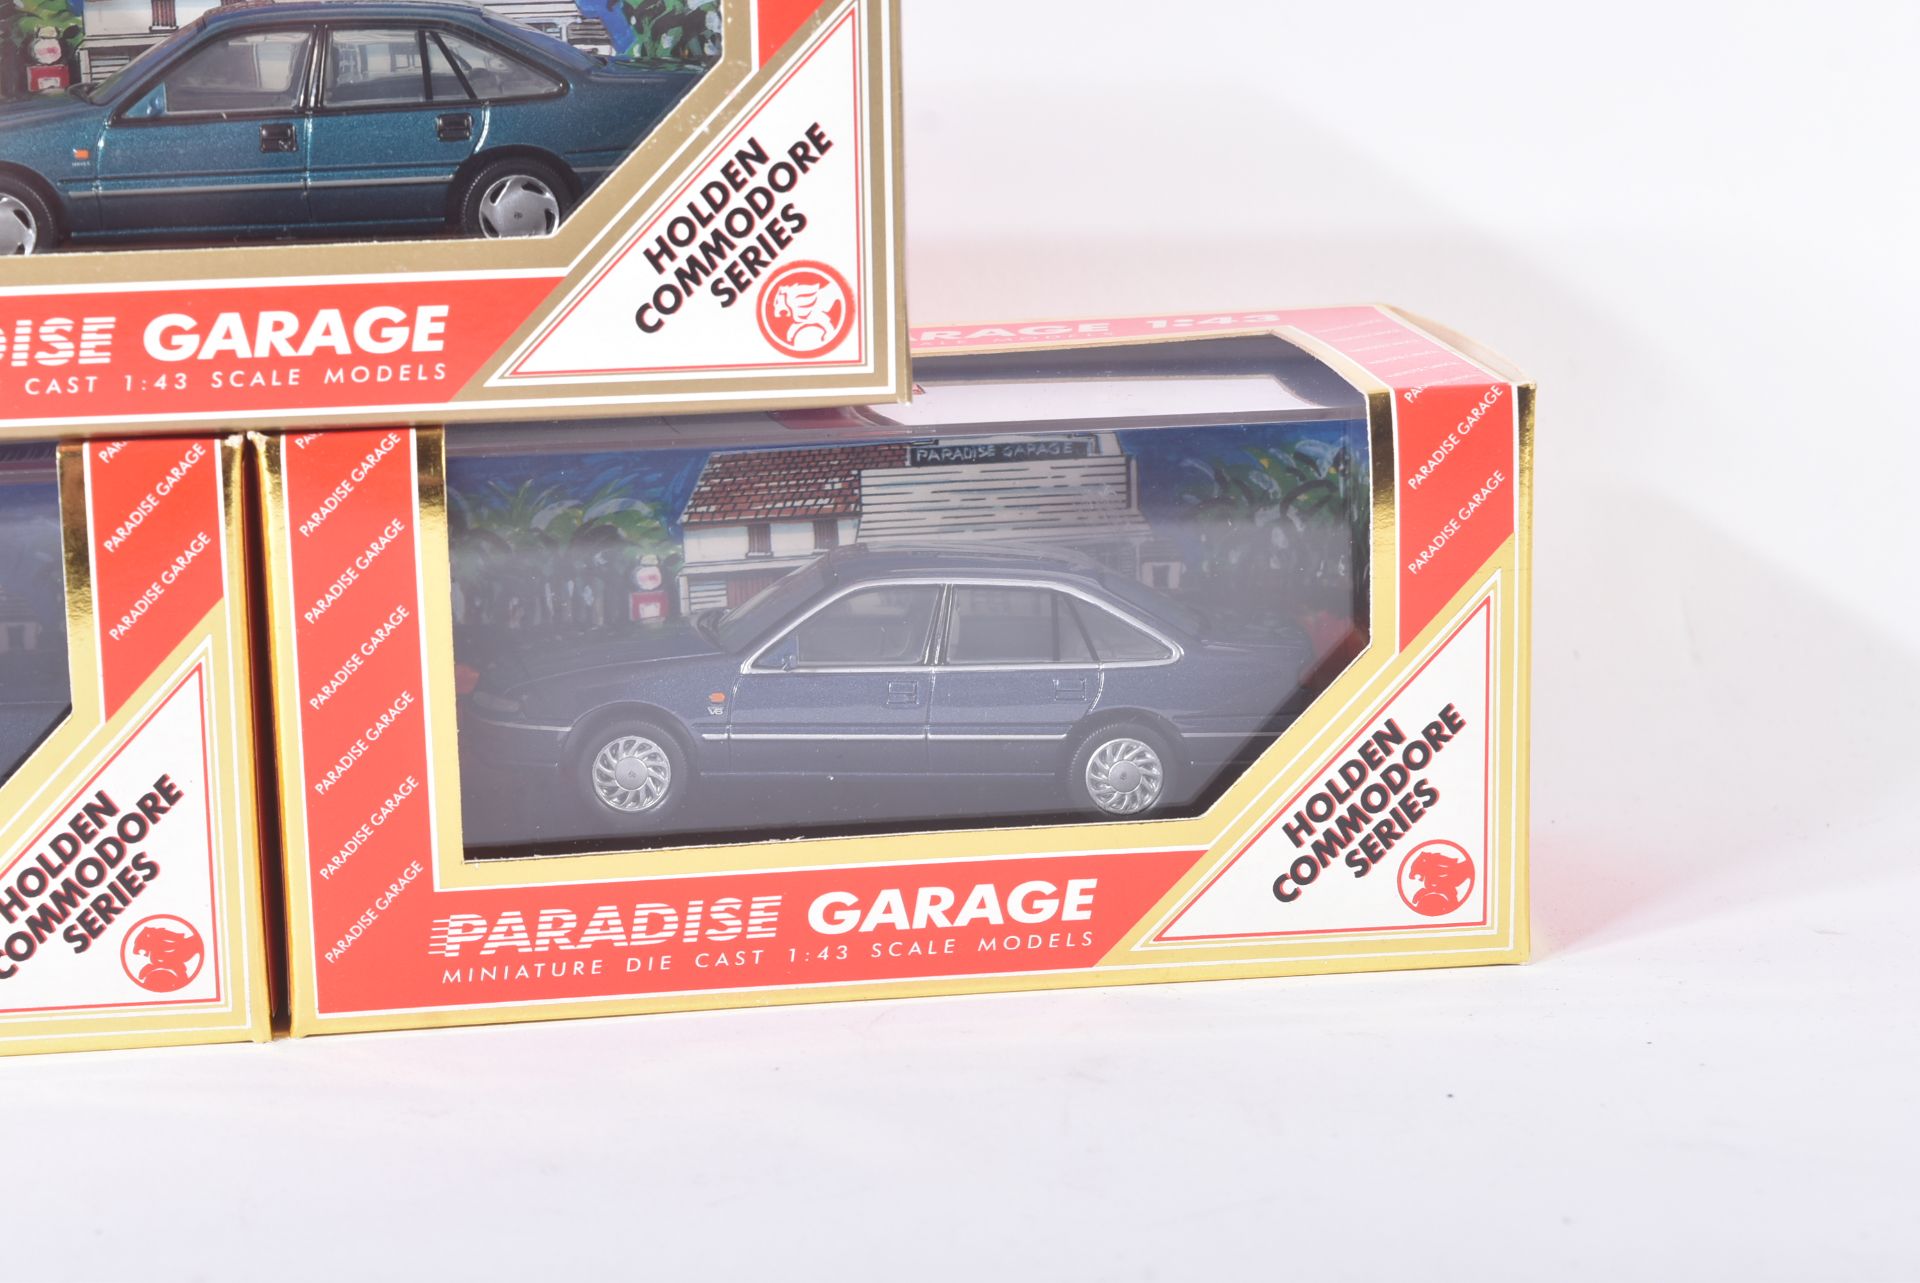 PARADISE GARAGE - 1/43 SCALE PRECISION DIECAST MODELS - Image 3 of 5